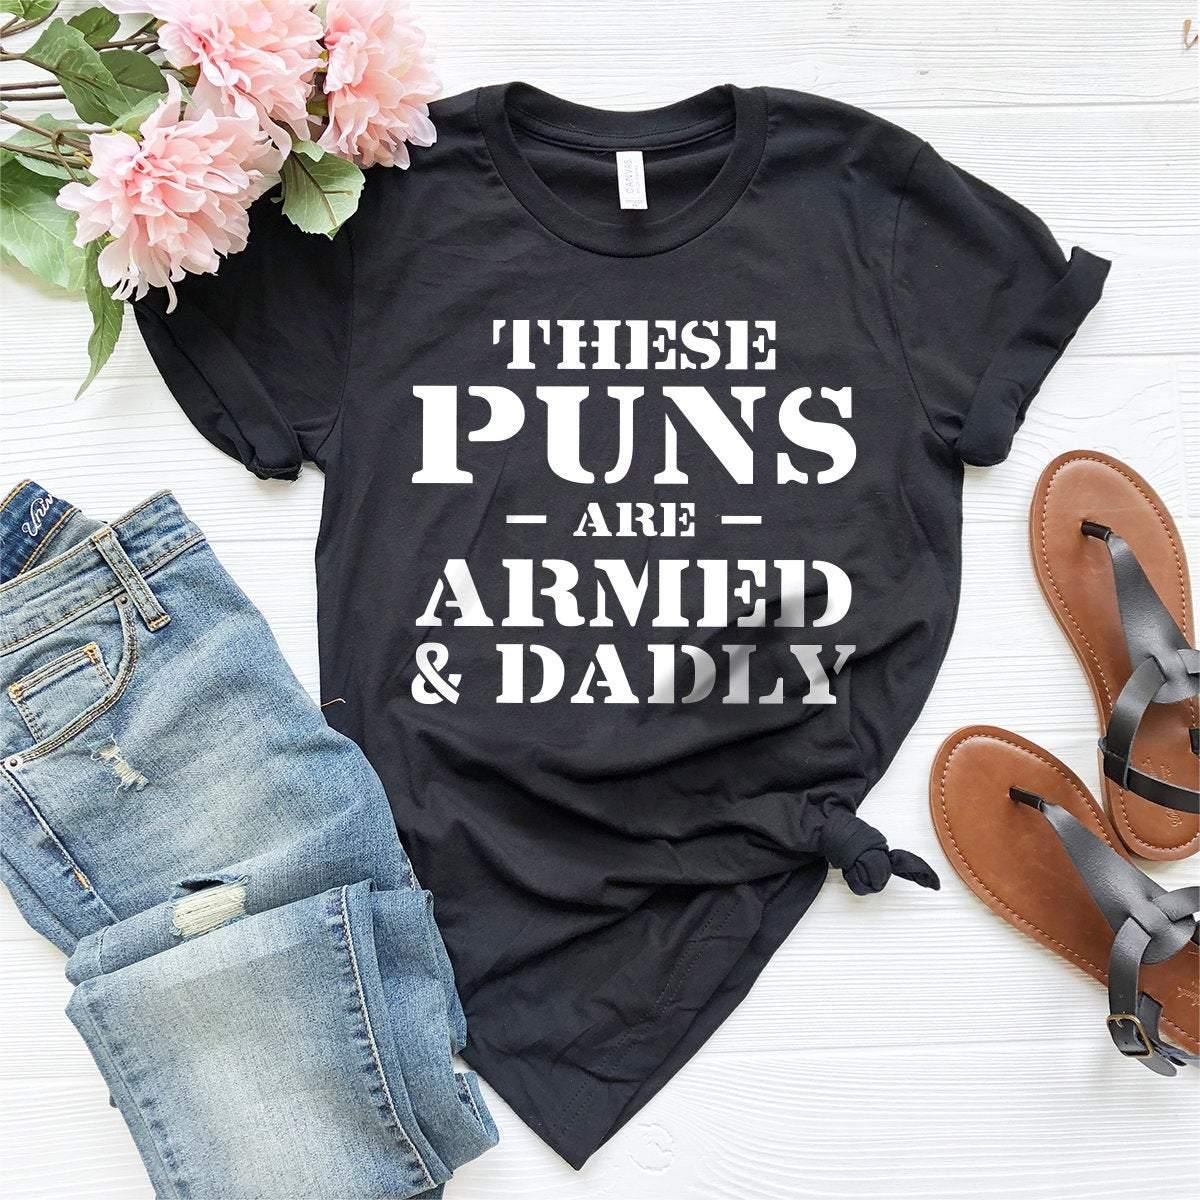 Funny Dad Shirt, Dad Shirt, Dad Birthday Gift, These Puns Are Armed And Dadly Shirt, Dad Humor Shirt, Dad Gift, Daddy Shirt, Dad Tee - Fastdeliverytees.com